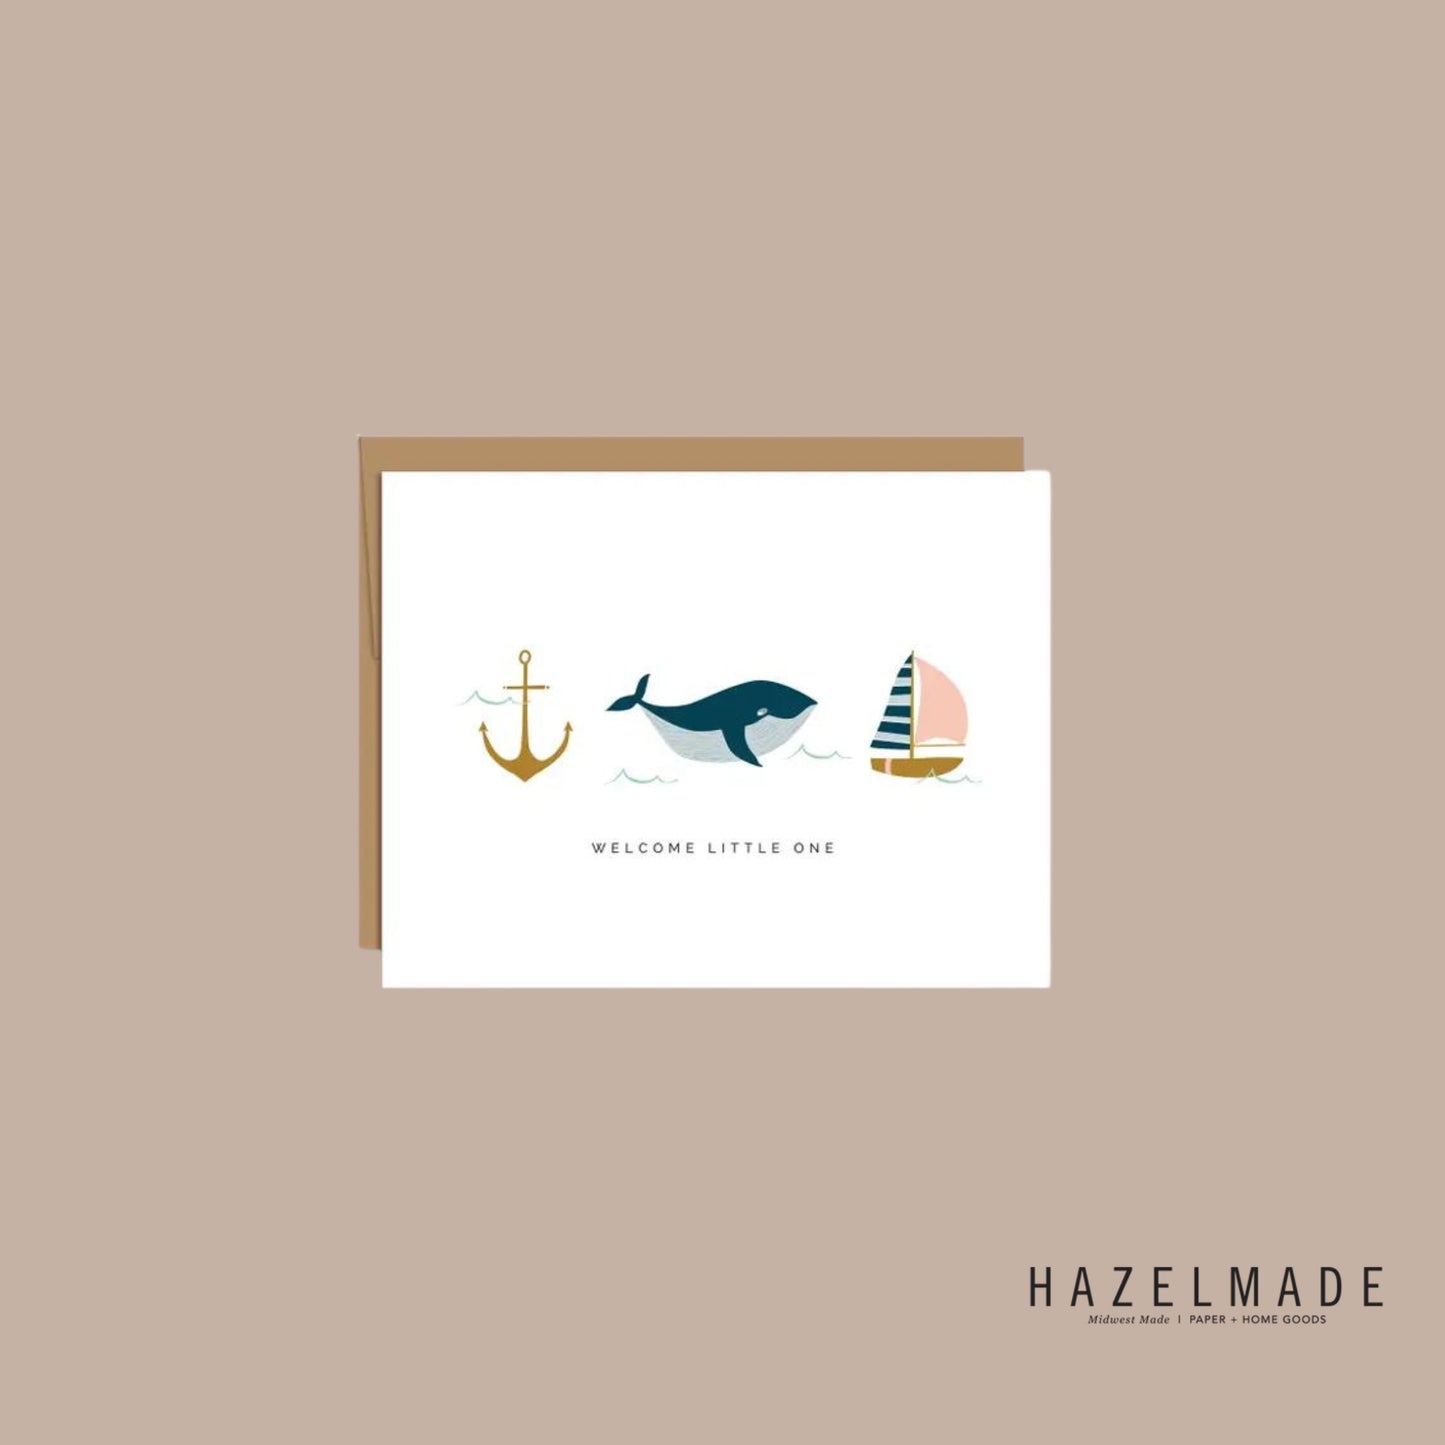 Hazelmade Greeting Cards - Hazelmade - Box Builder Item - KINSHIP GIFT - birthday gift, hazelmade, LDT:GW:RESTRICT - Pittsburgh - gift - boxes - gift - baskets - corporate - gifts - holiday - gifts